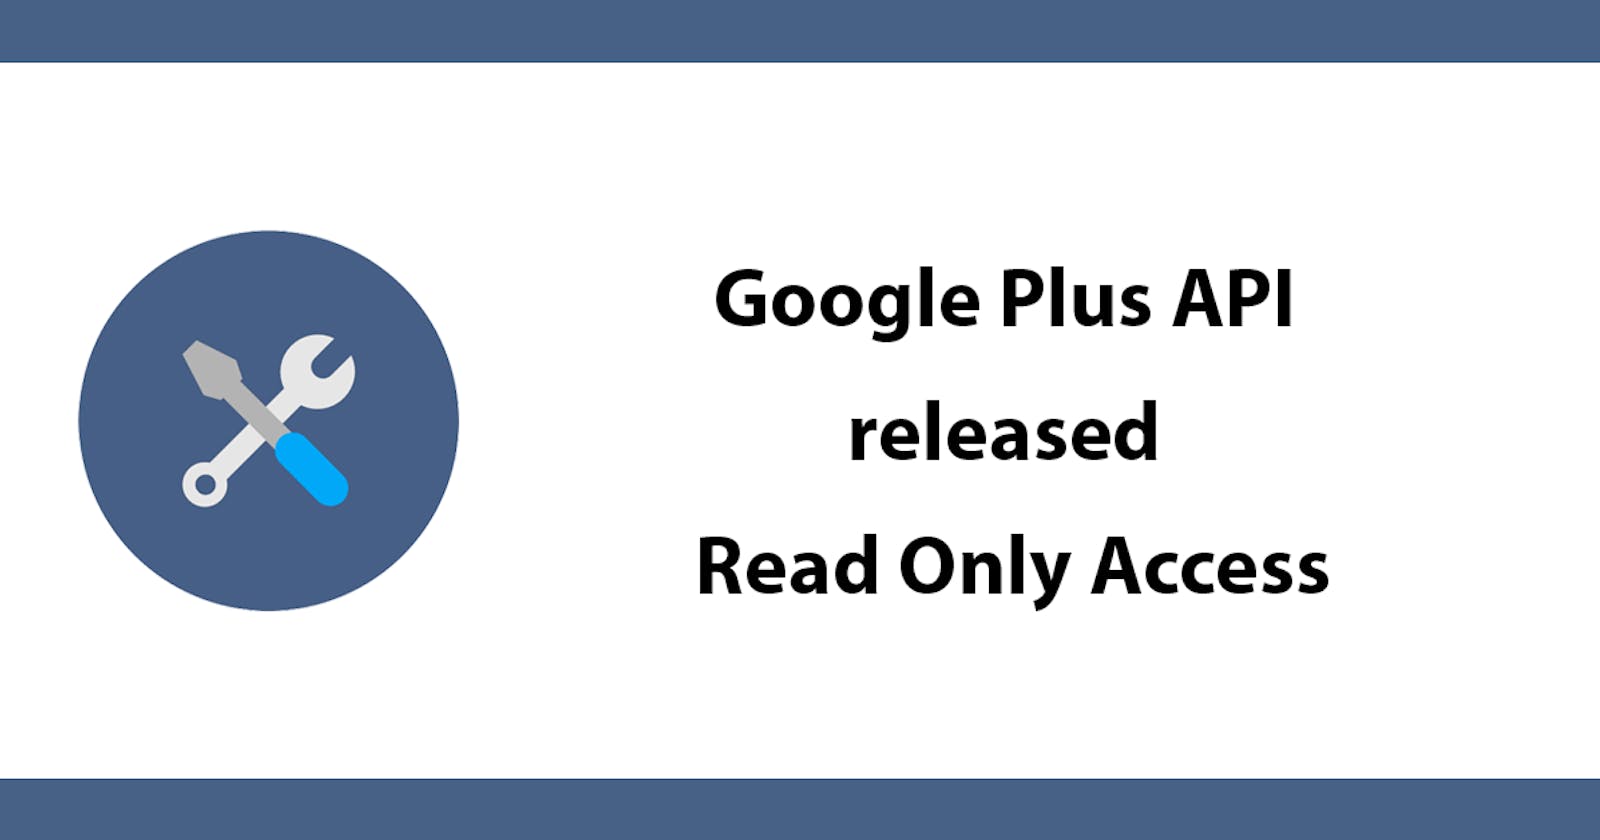 Google Plus API released Read Only Access